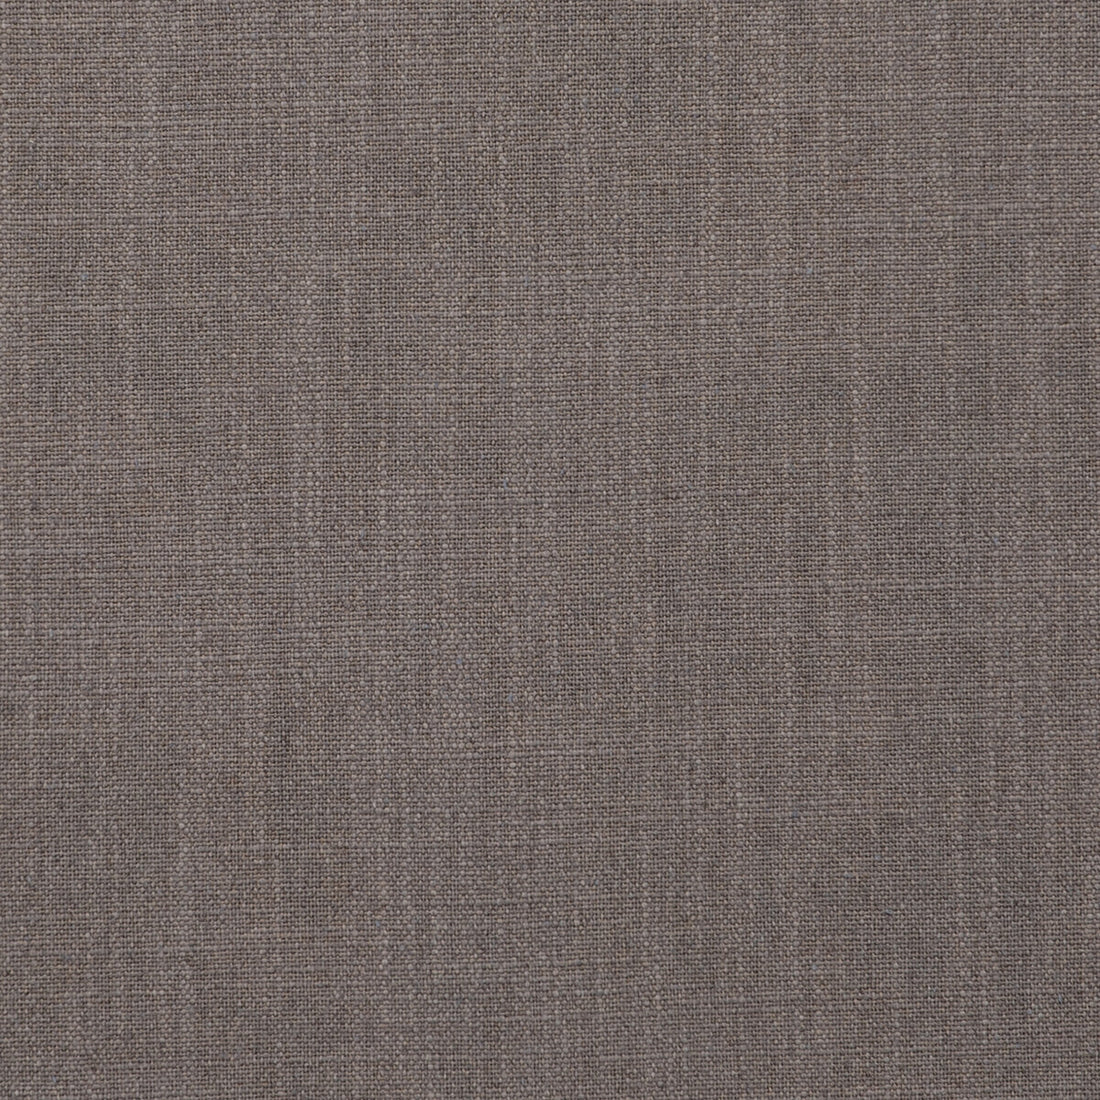 Easton fabric in nickel color - pattern F0736/06.CAC.0 - by Clarke And Clarke in the Clarke &amp; Clarke Manor House collection